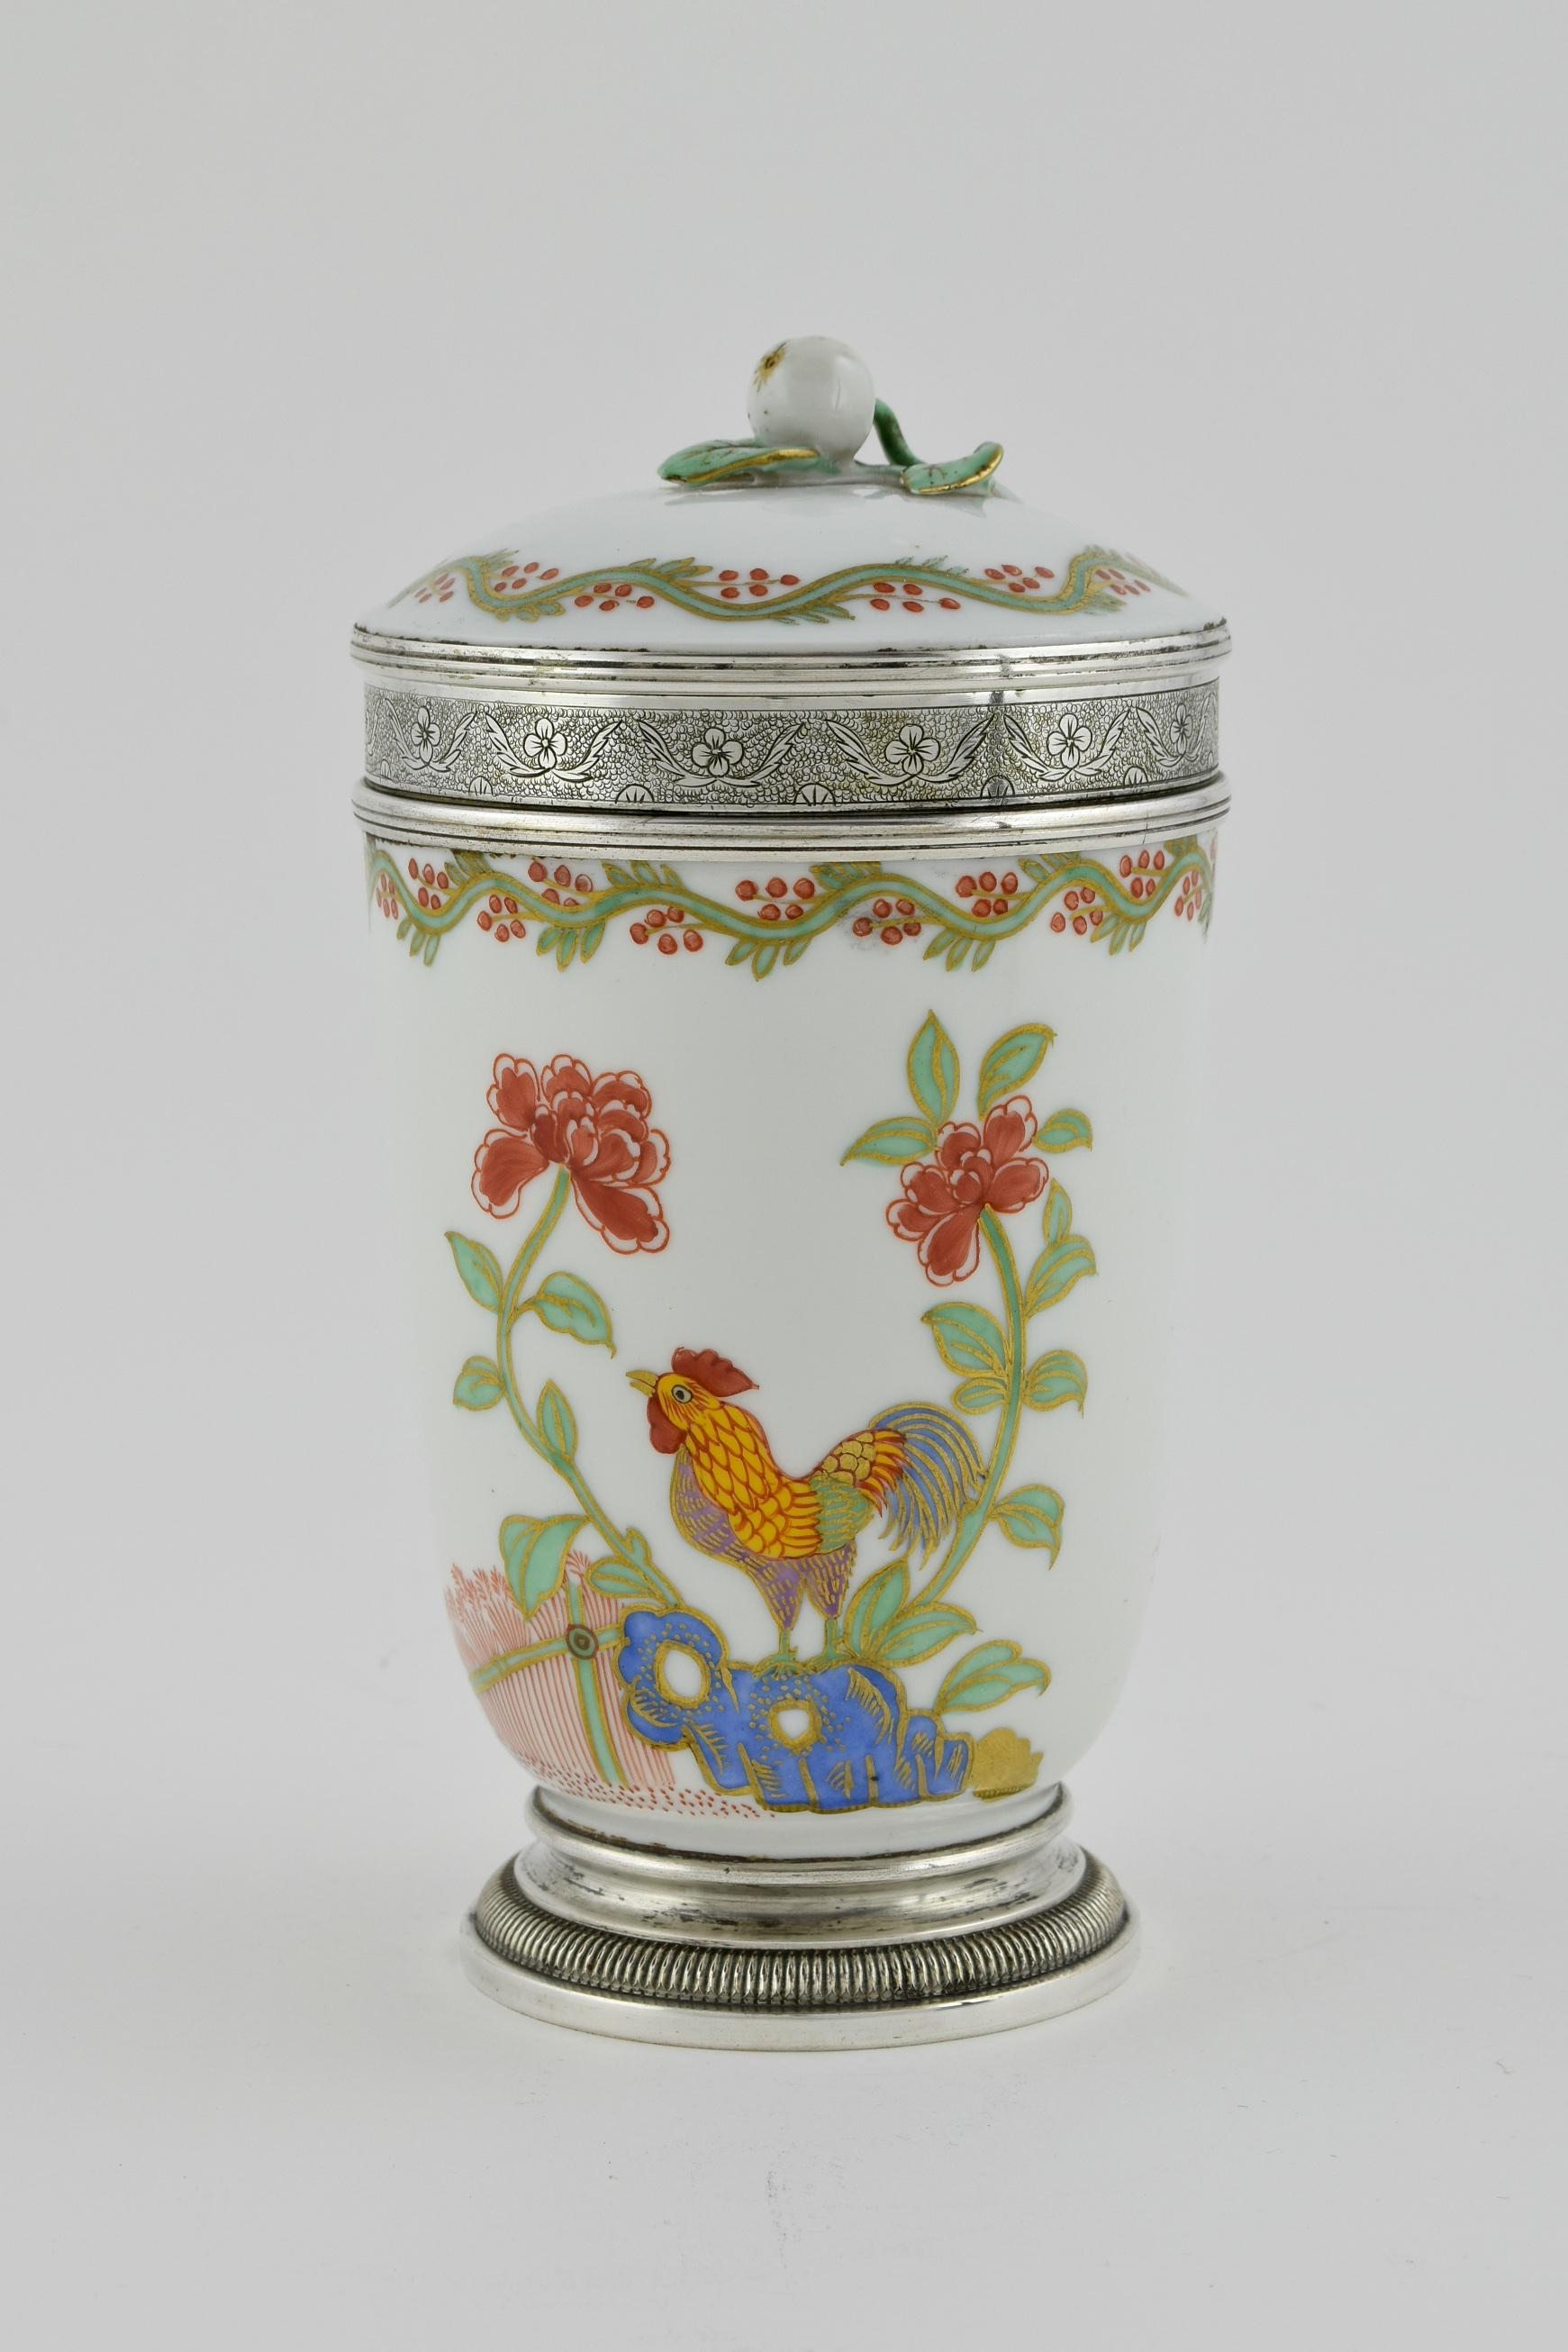 This cup and cover displays figures in traditional dress, interacting on one side, and on the other a cockerel. The body and lid of the cup is beautifully decorated with ascetically pleasing flowers, foliage and birds. The finial is formed as a